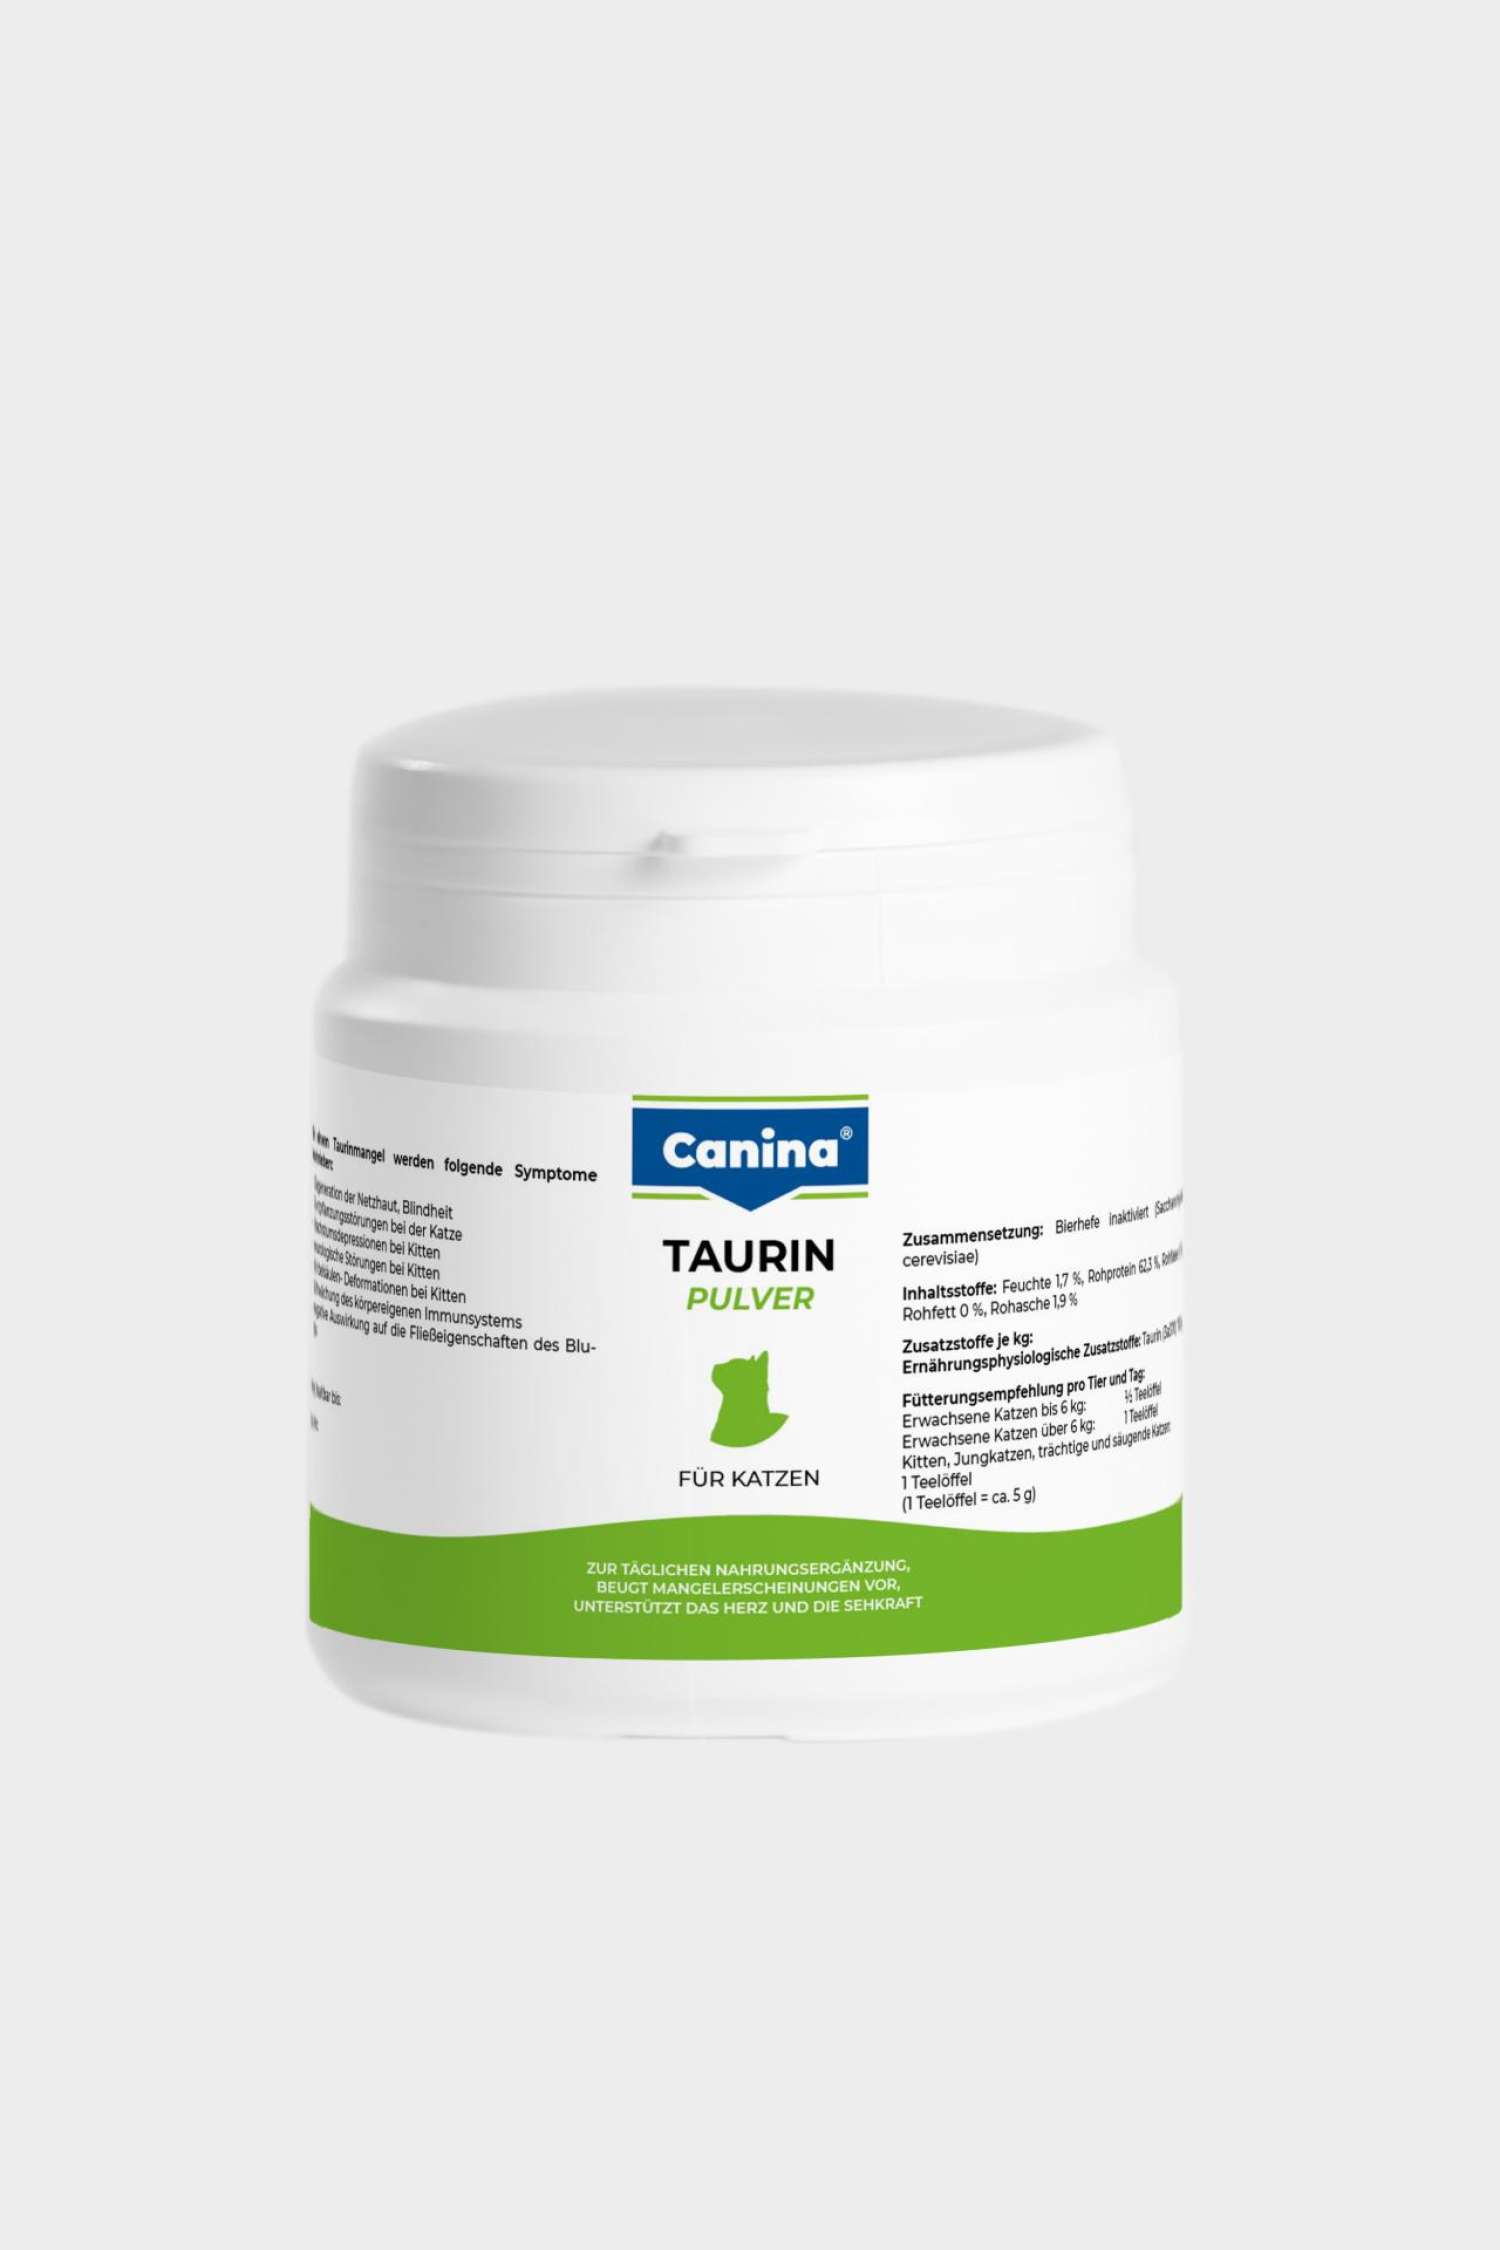 Taurine for cats